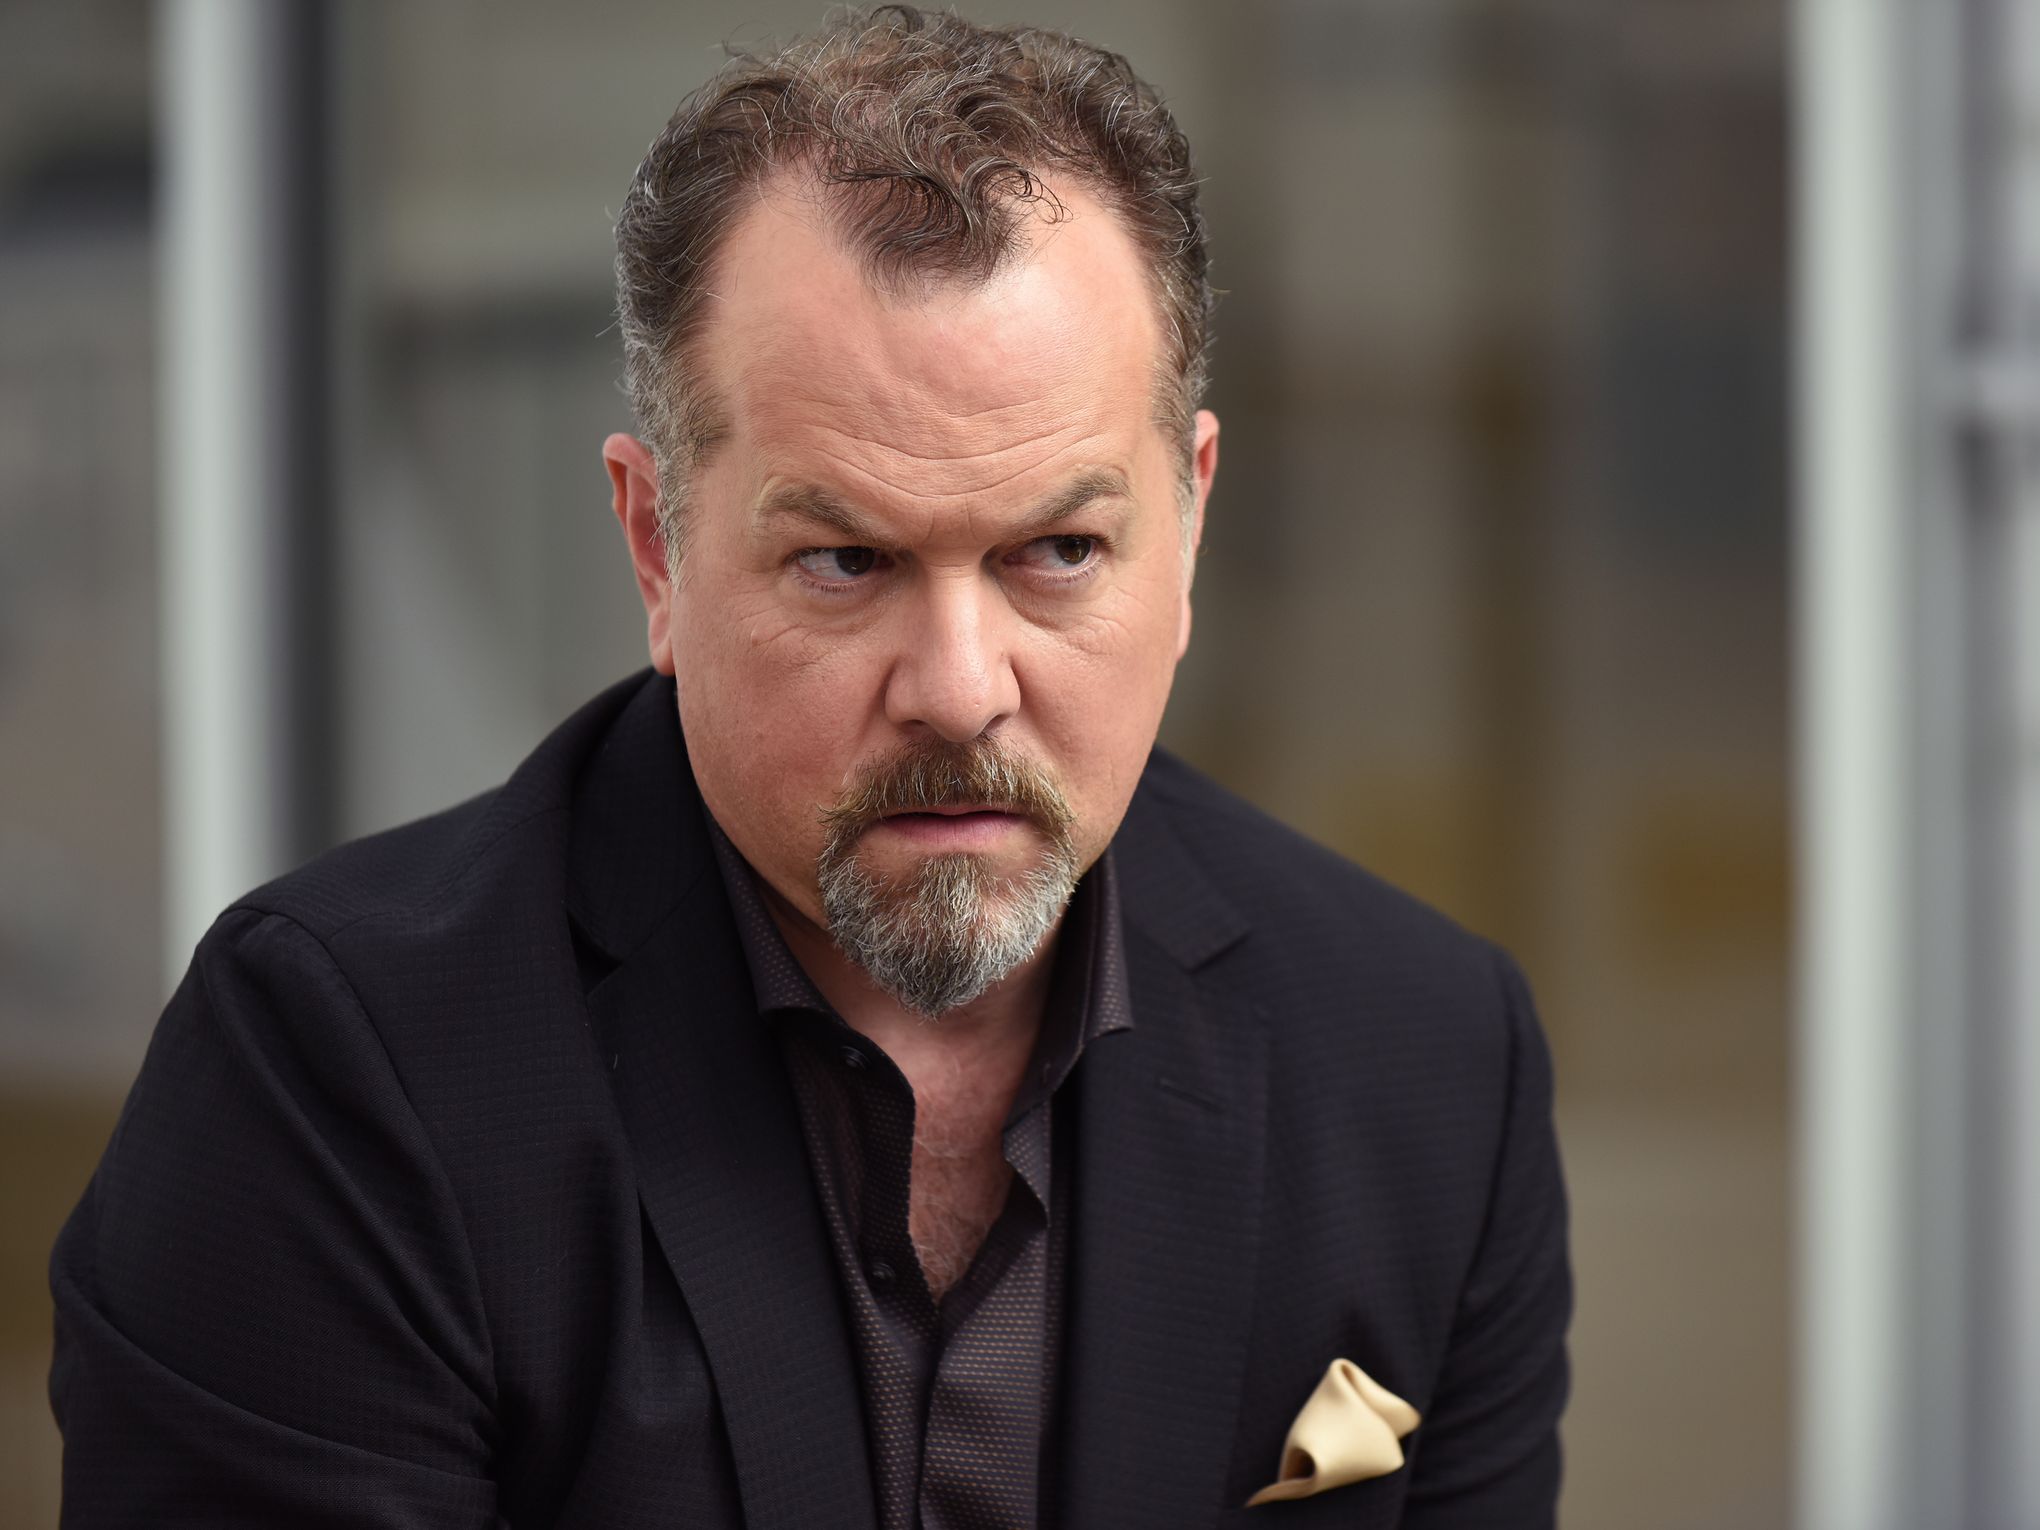 David Costabile age: How old is David Costabile?